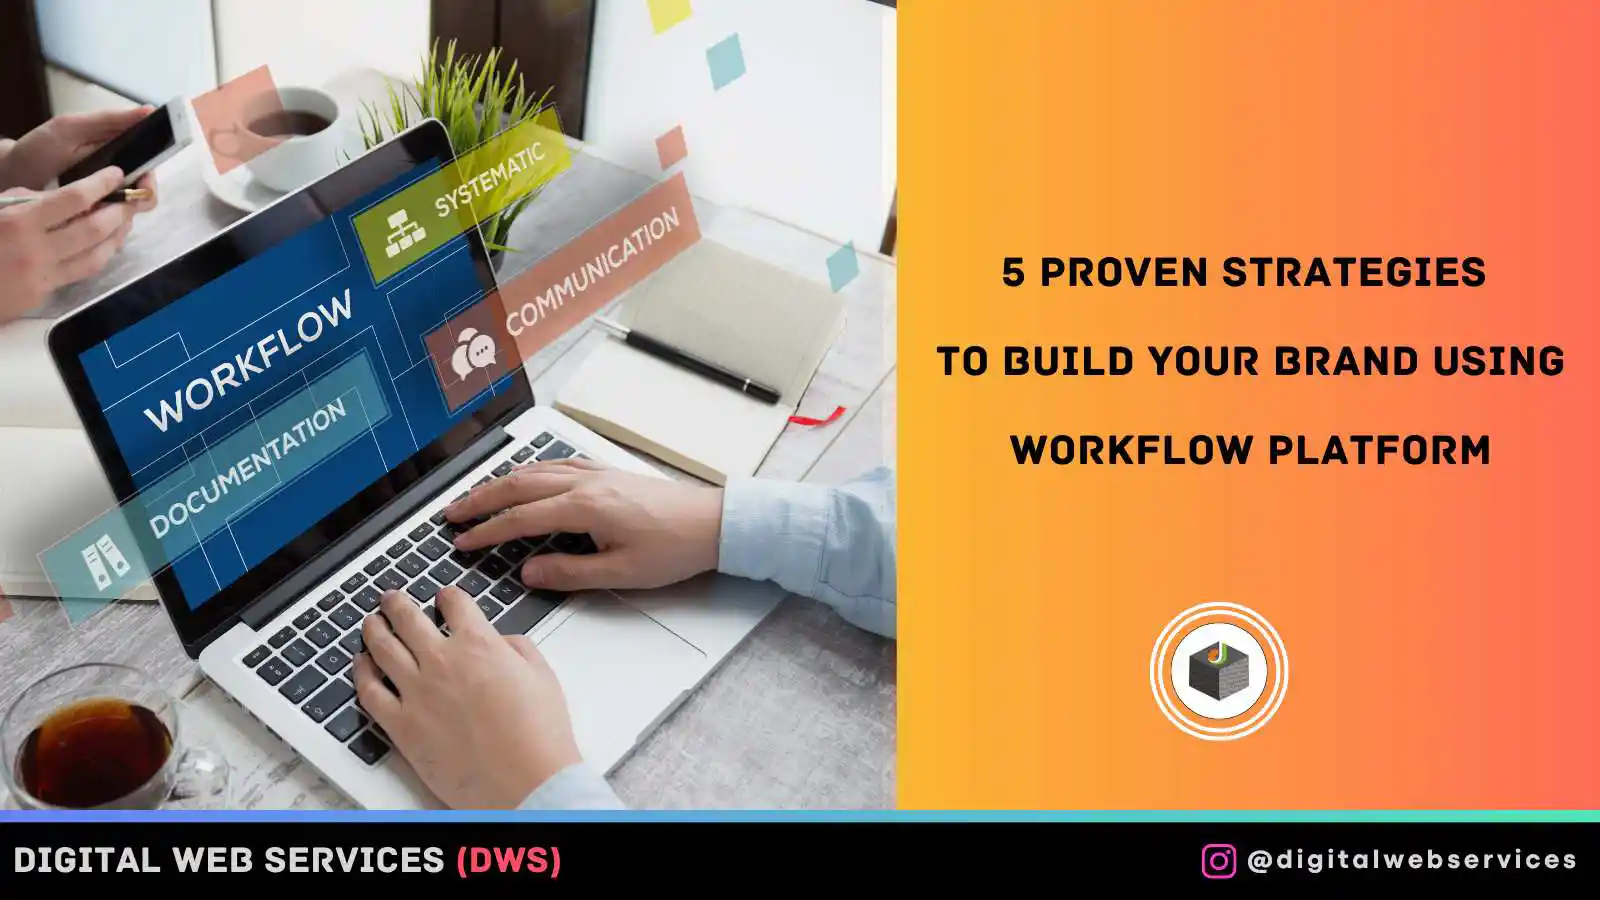 5 Proven Strategies to Build Your Brand Using Workflow Platform